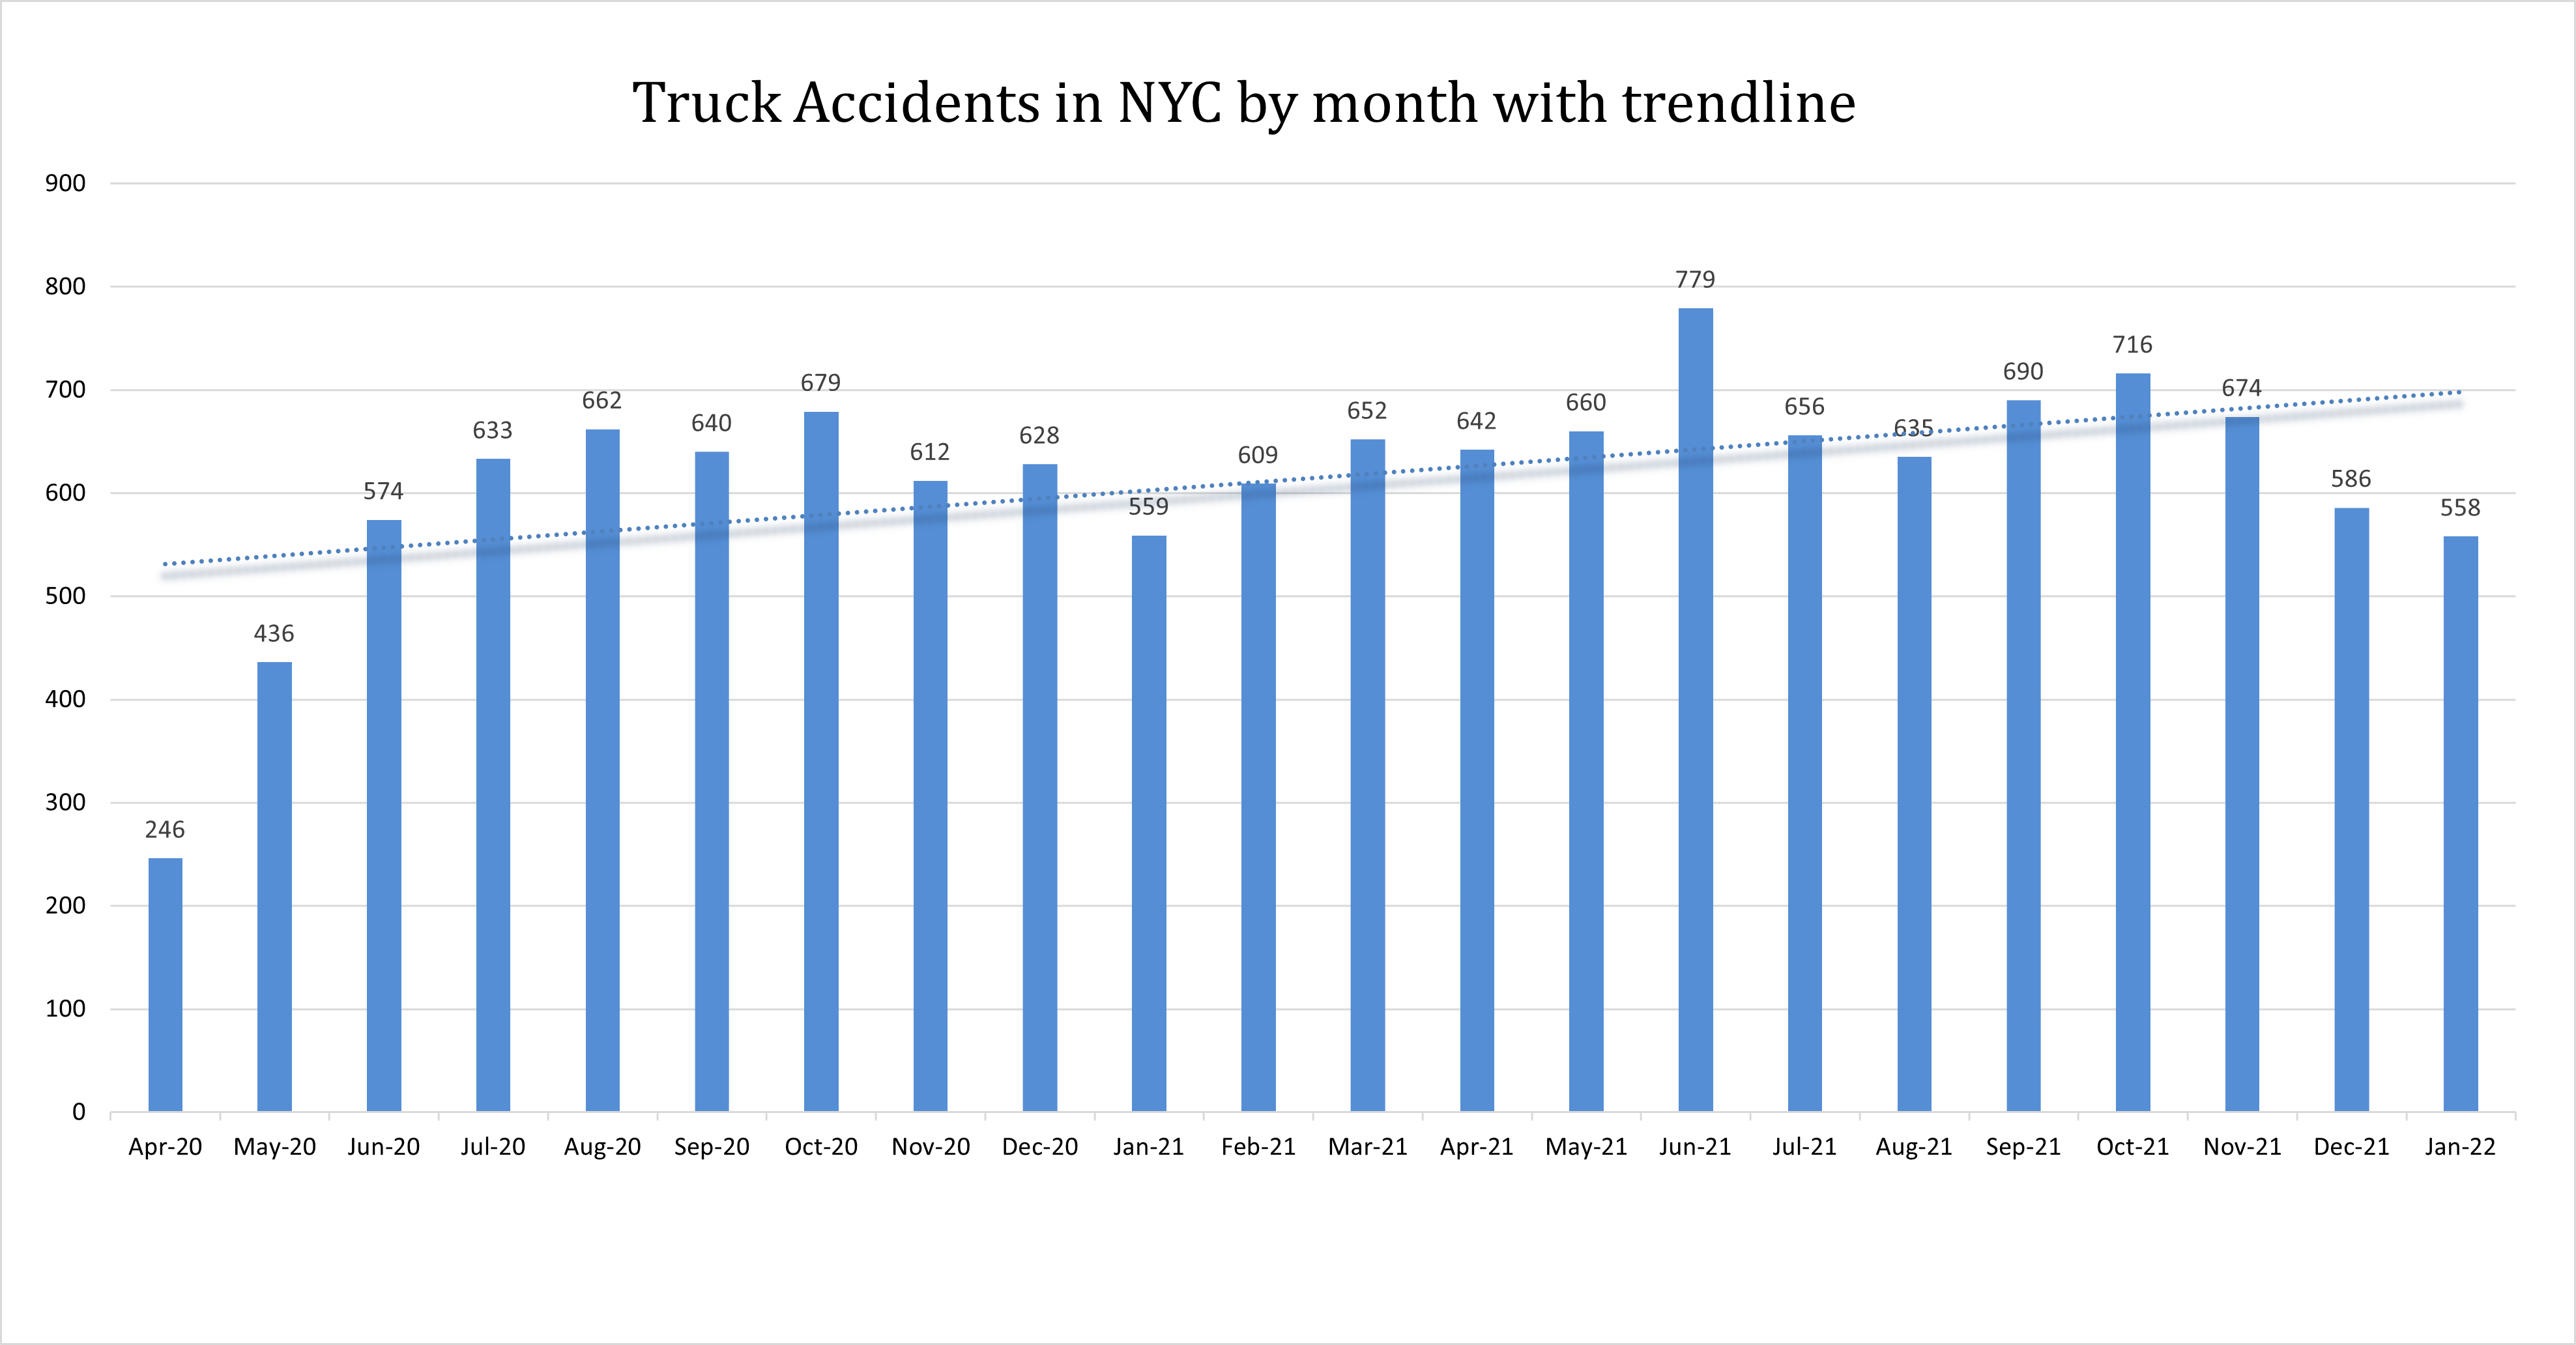 NYC truck accidents January 22